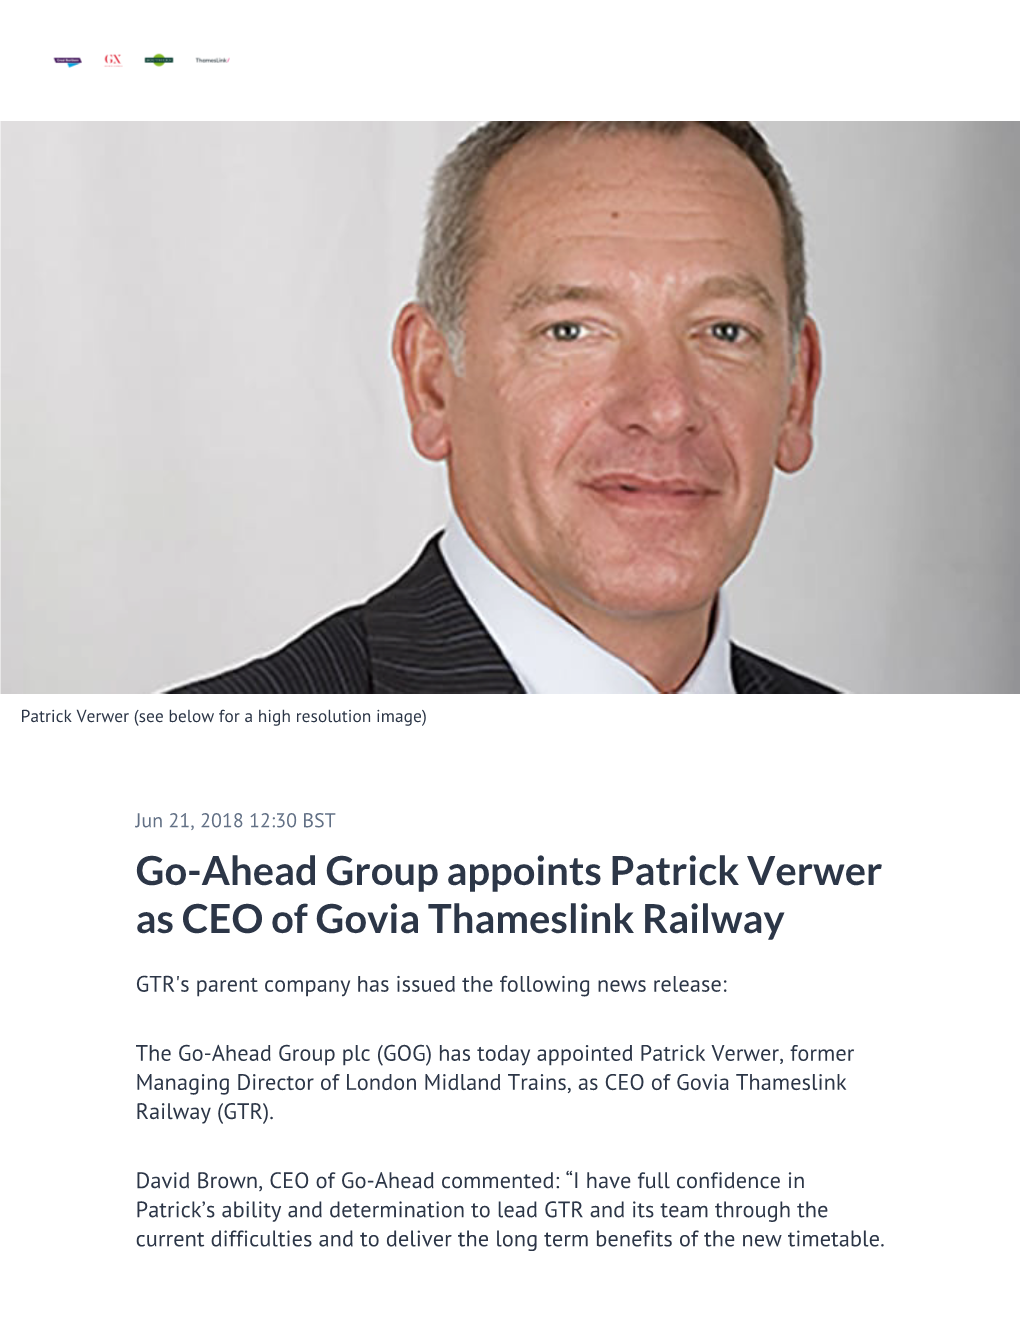 ​Go-Ahead Group Appoints Patrick Verwer As CEO of Govia